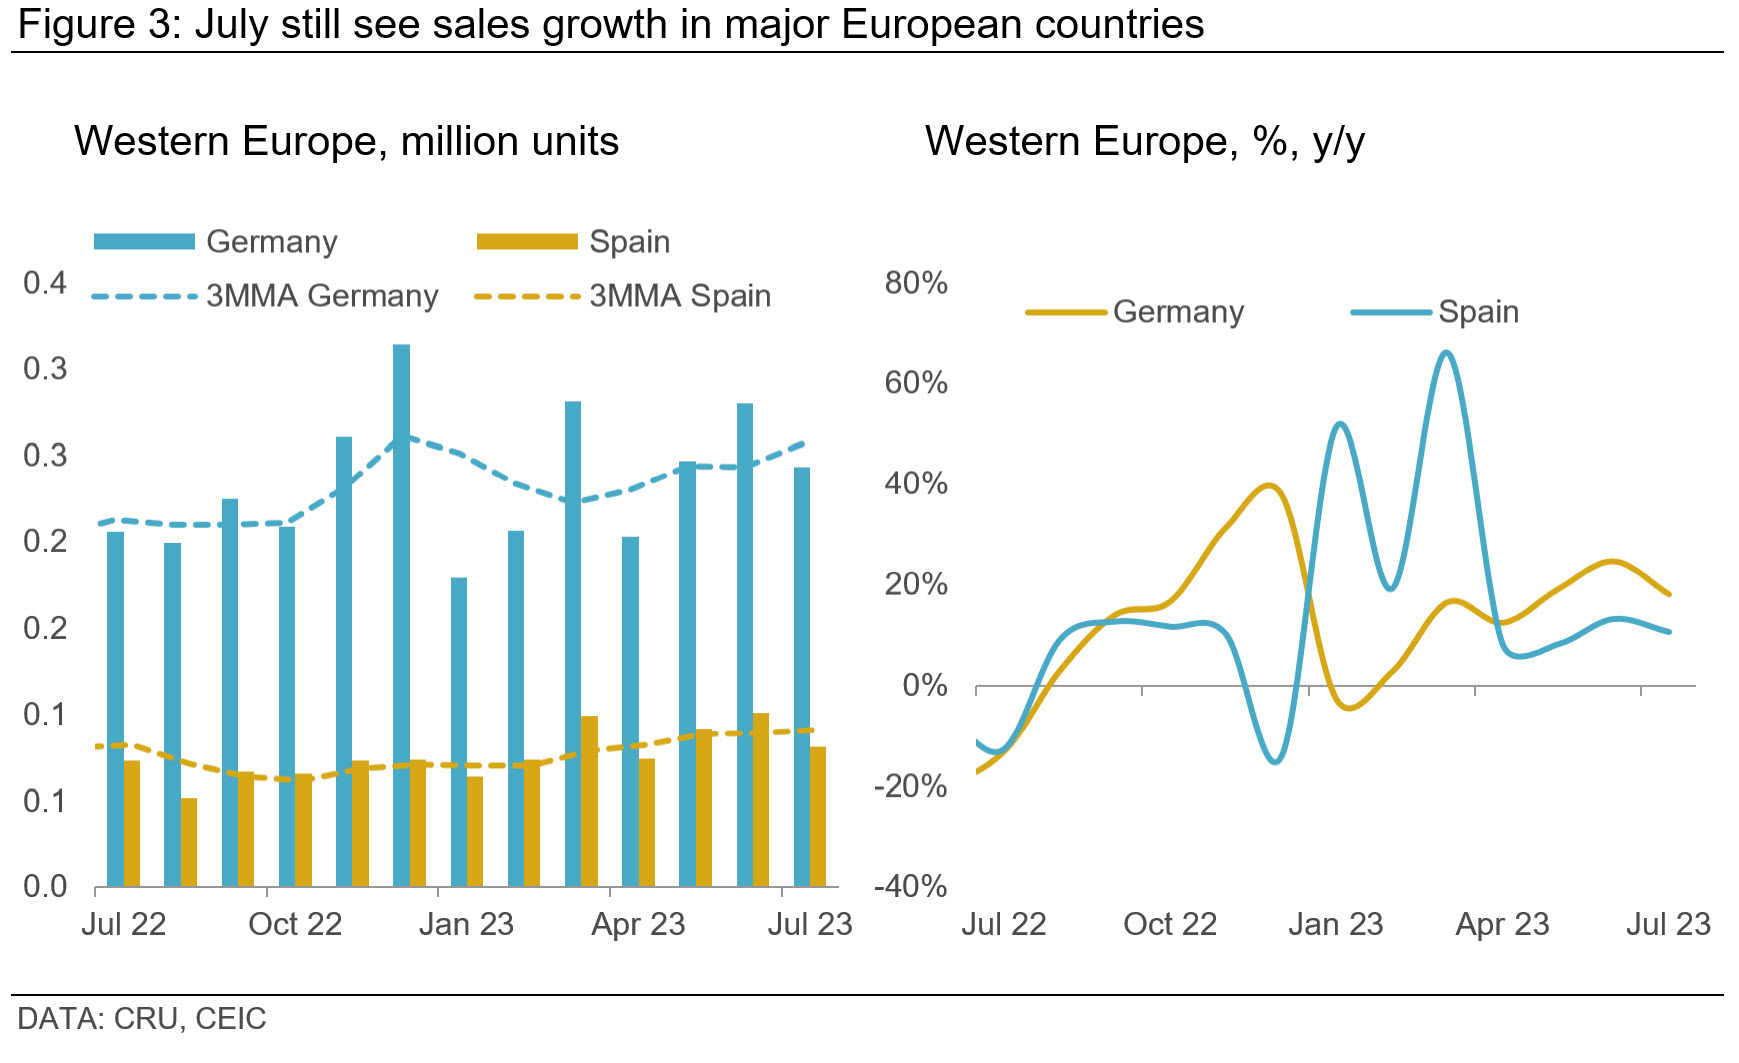 Graph showing that July still see sales growth in major European countries